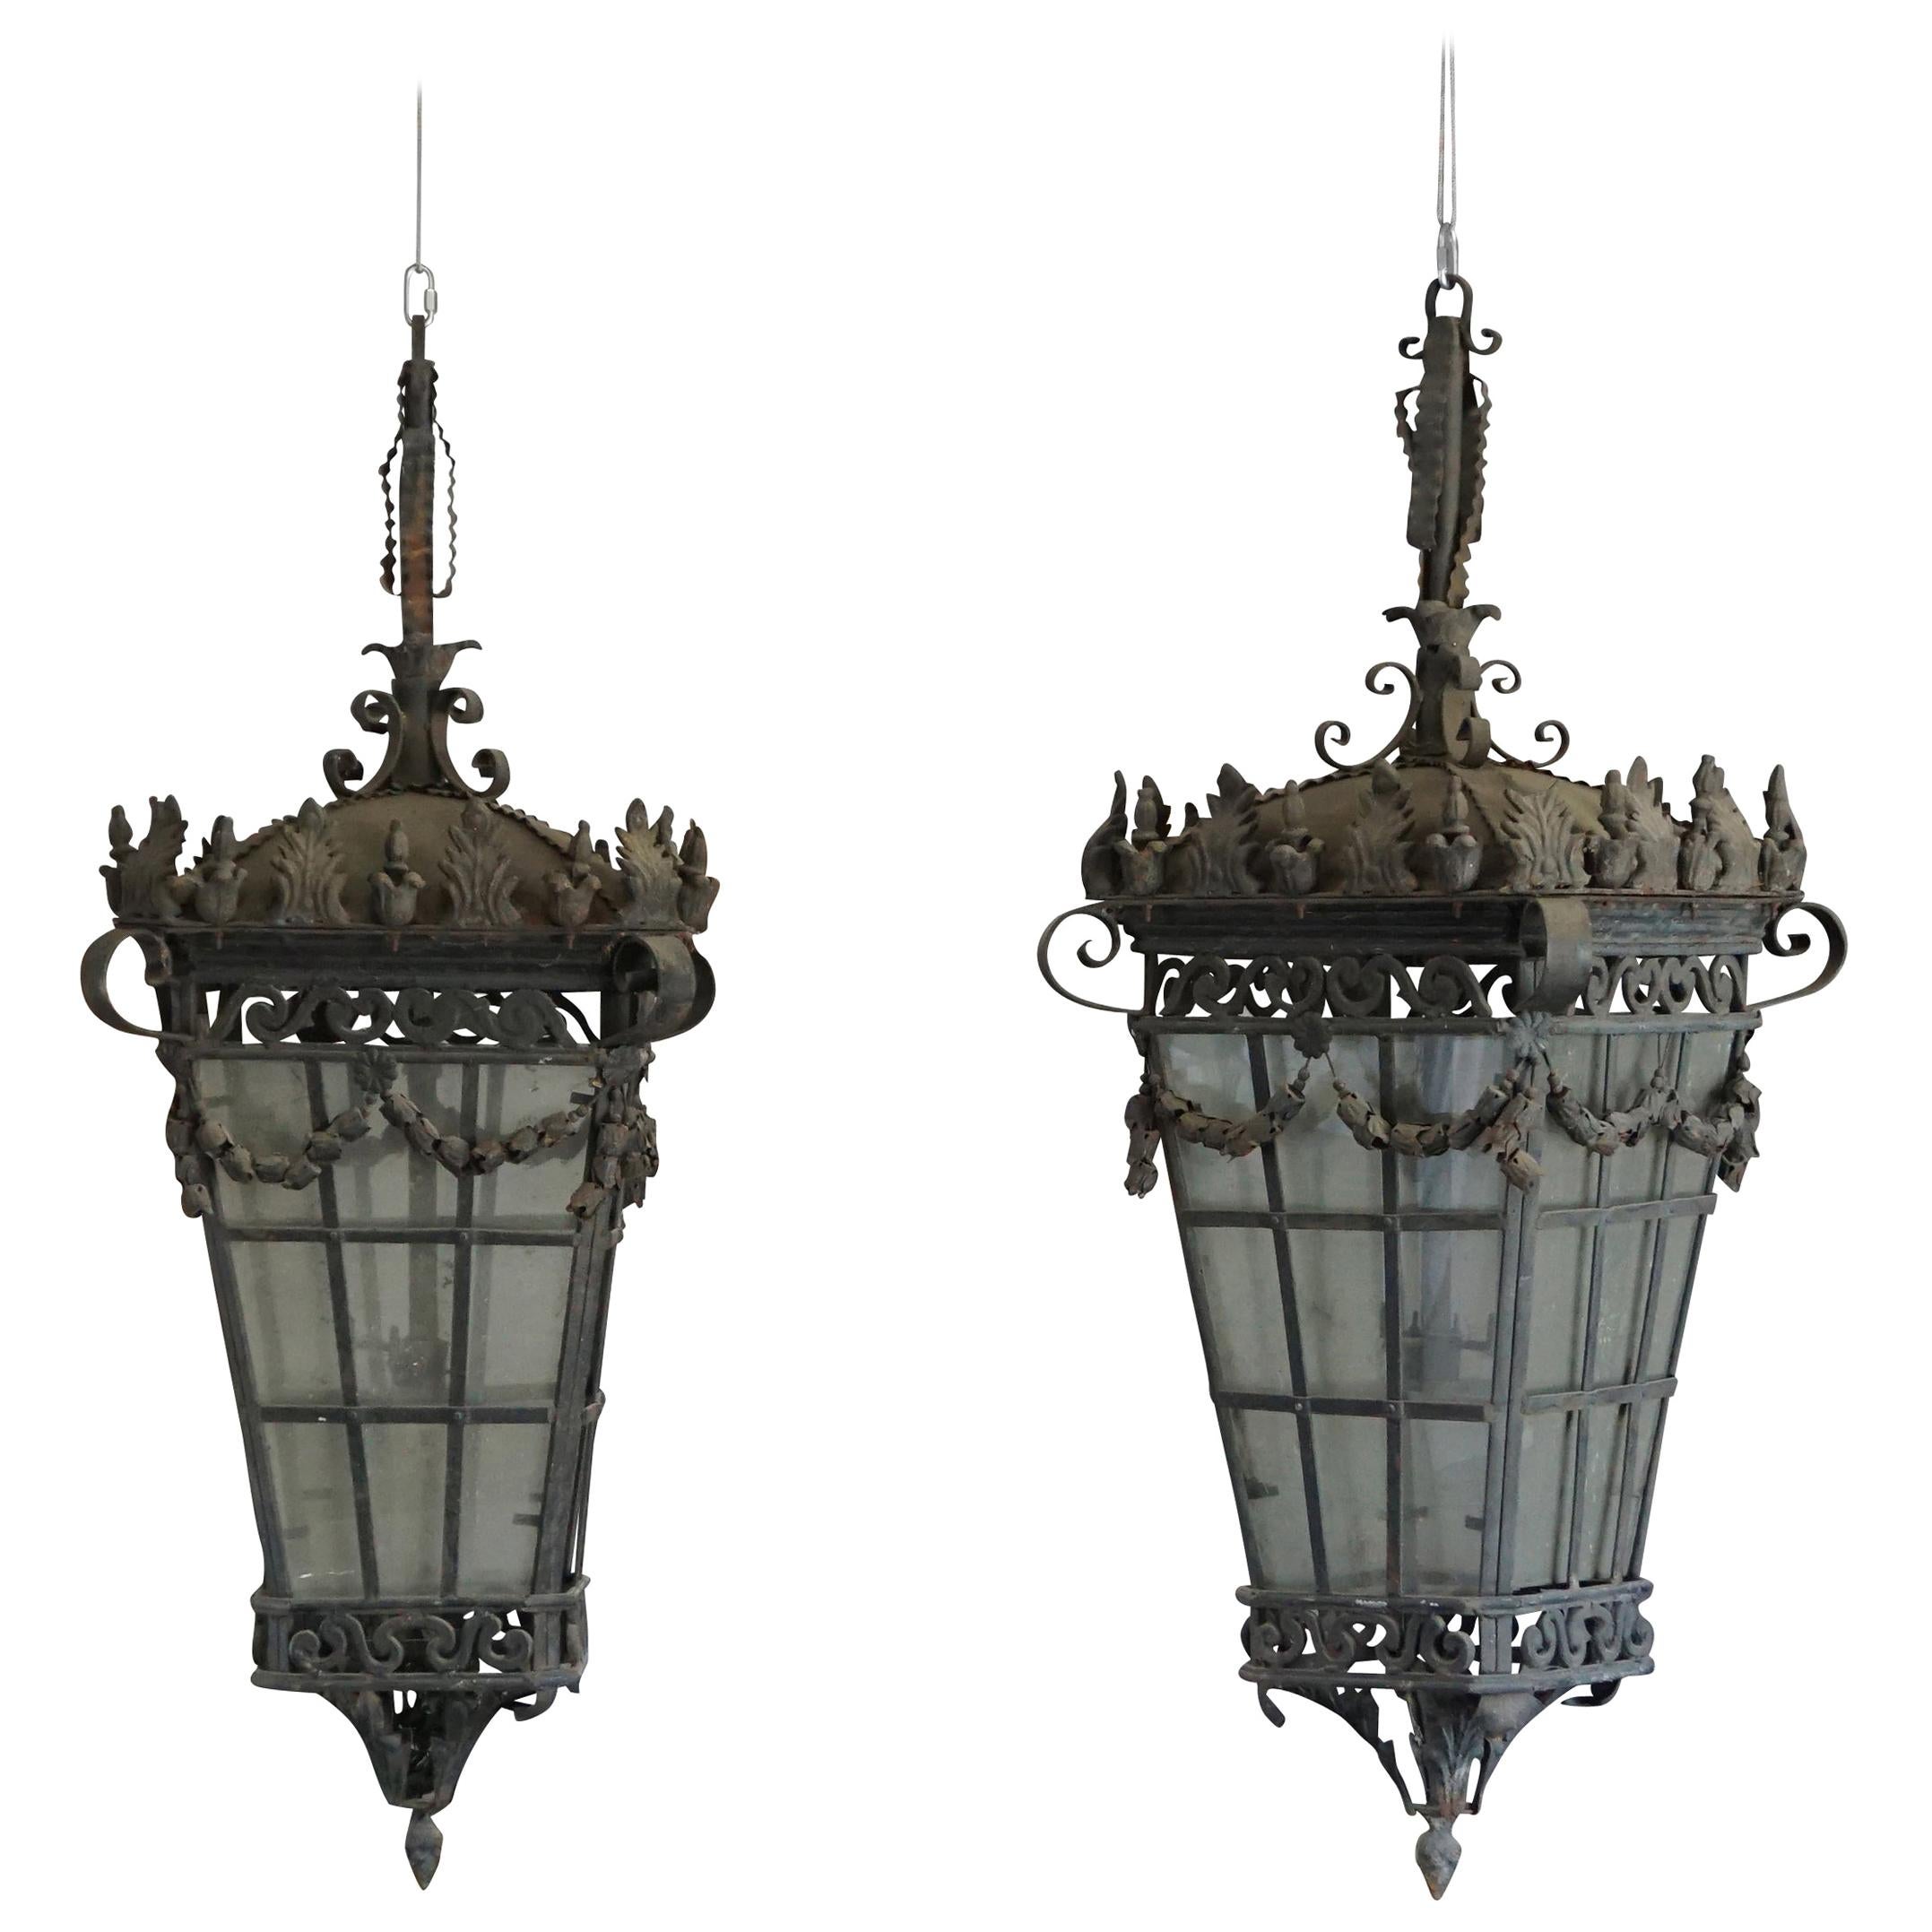 20th Century Pair of Parisian Hanging Lanterns, French Art Deco Iron Lights For Sale